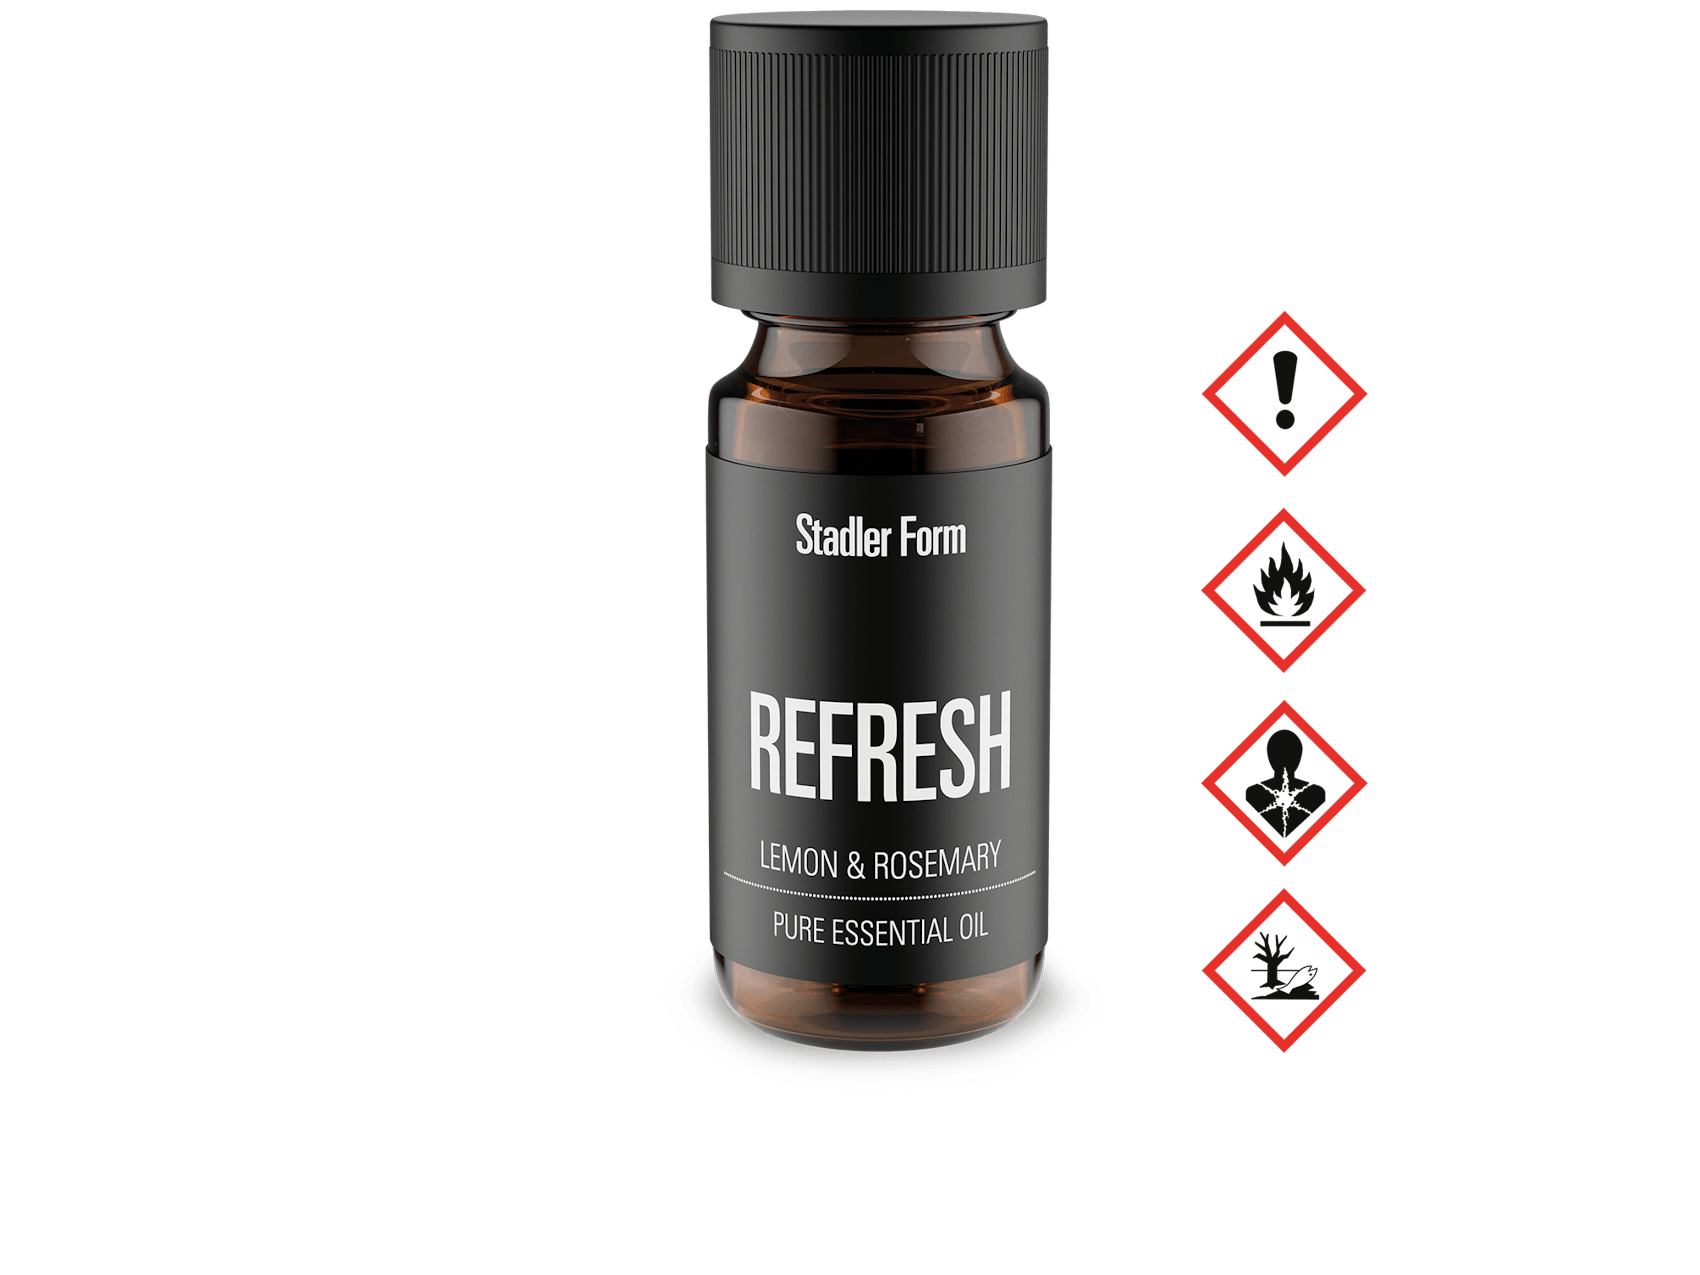 Refresh essential oil by Stadler Form with symbols